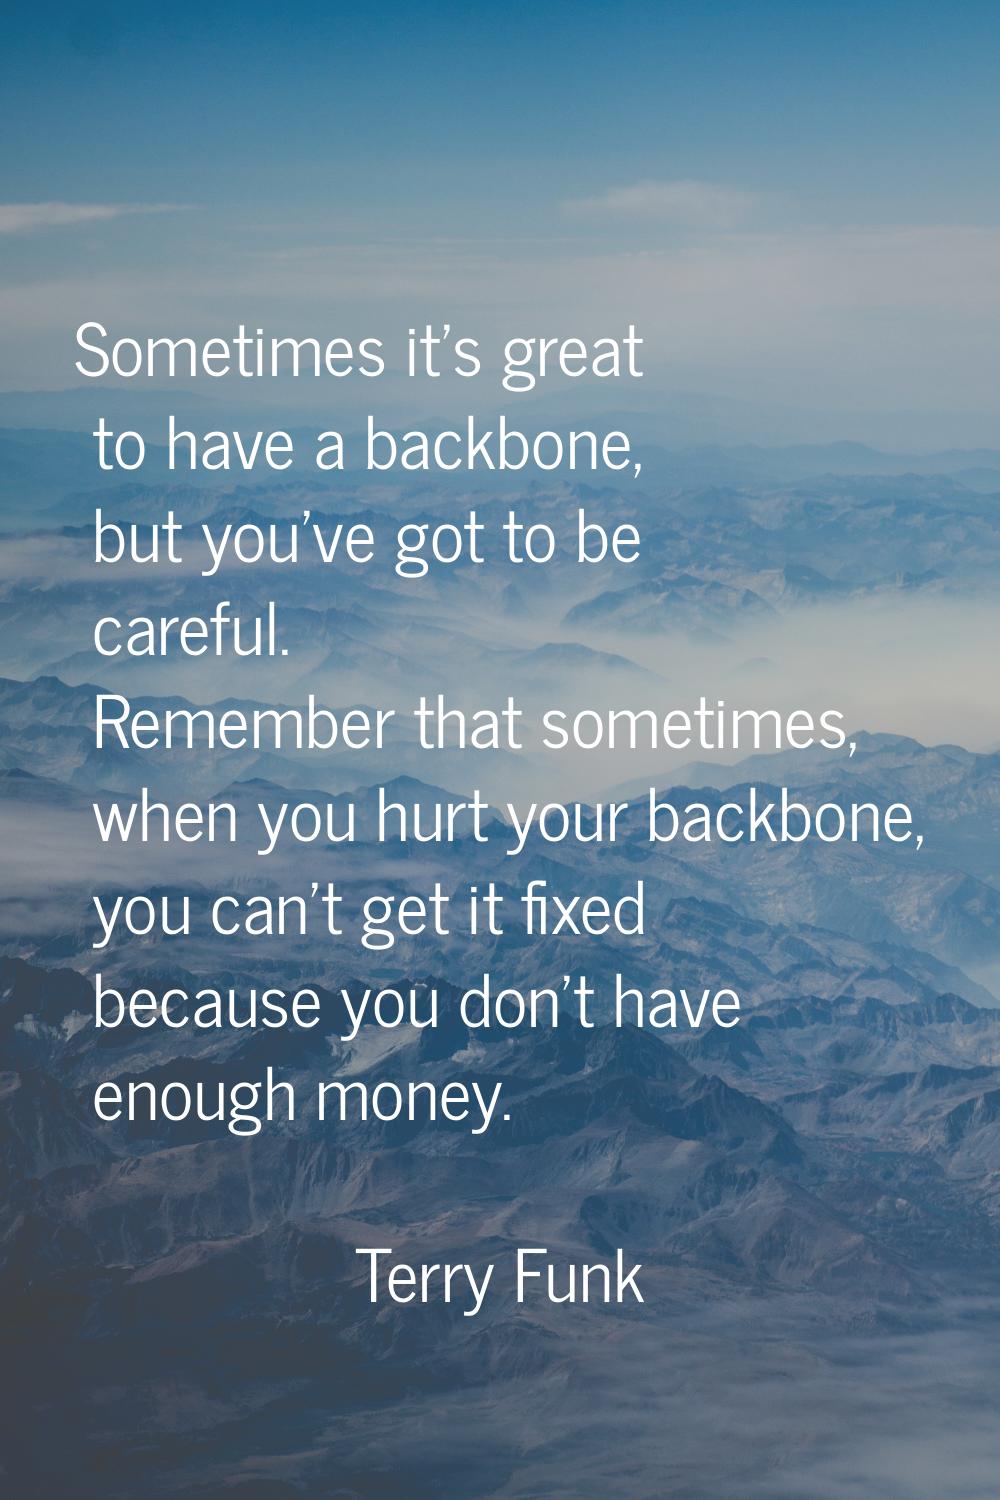 Sometimes it's great to have a backbone, but you've got to be careful. Remember that sometimes, whe